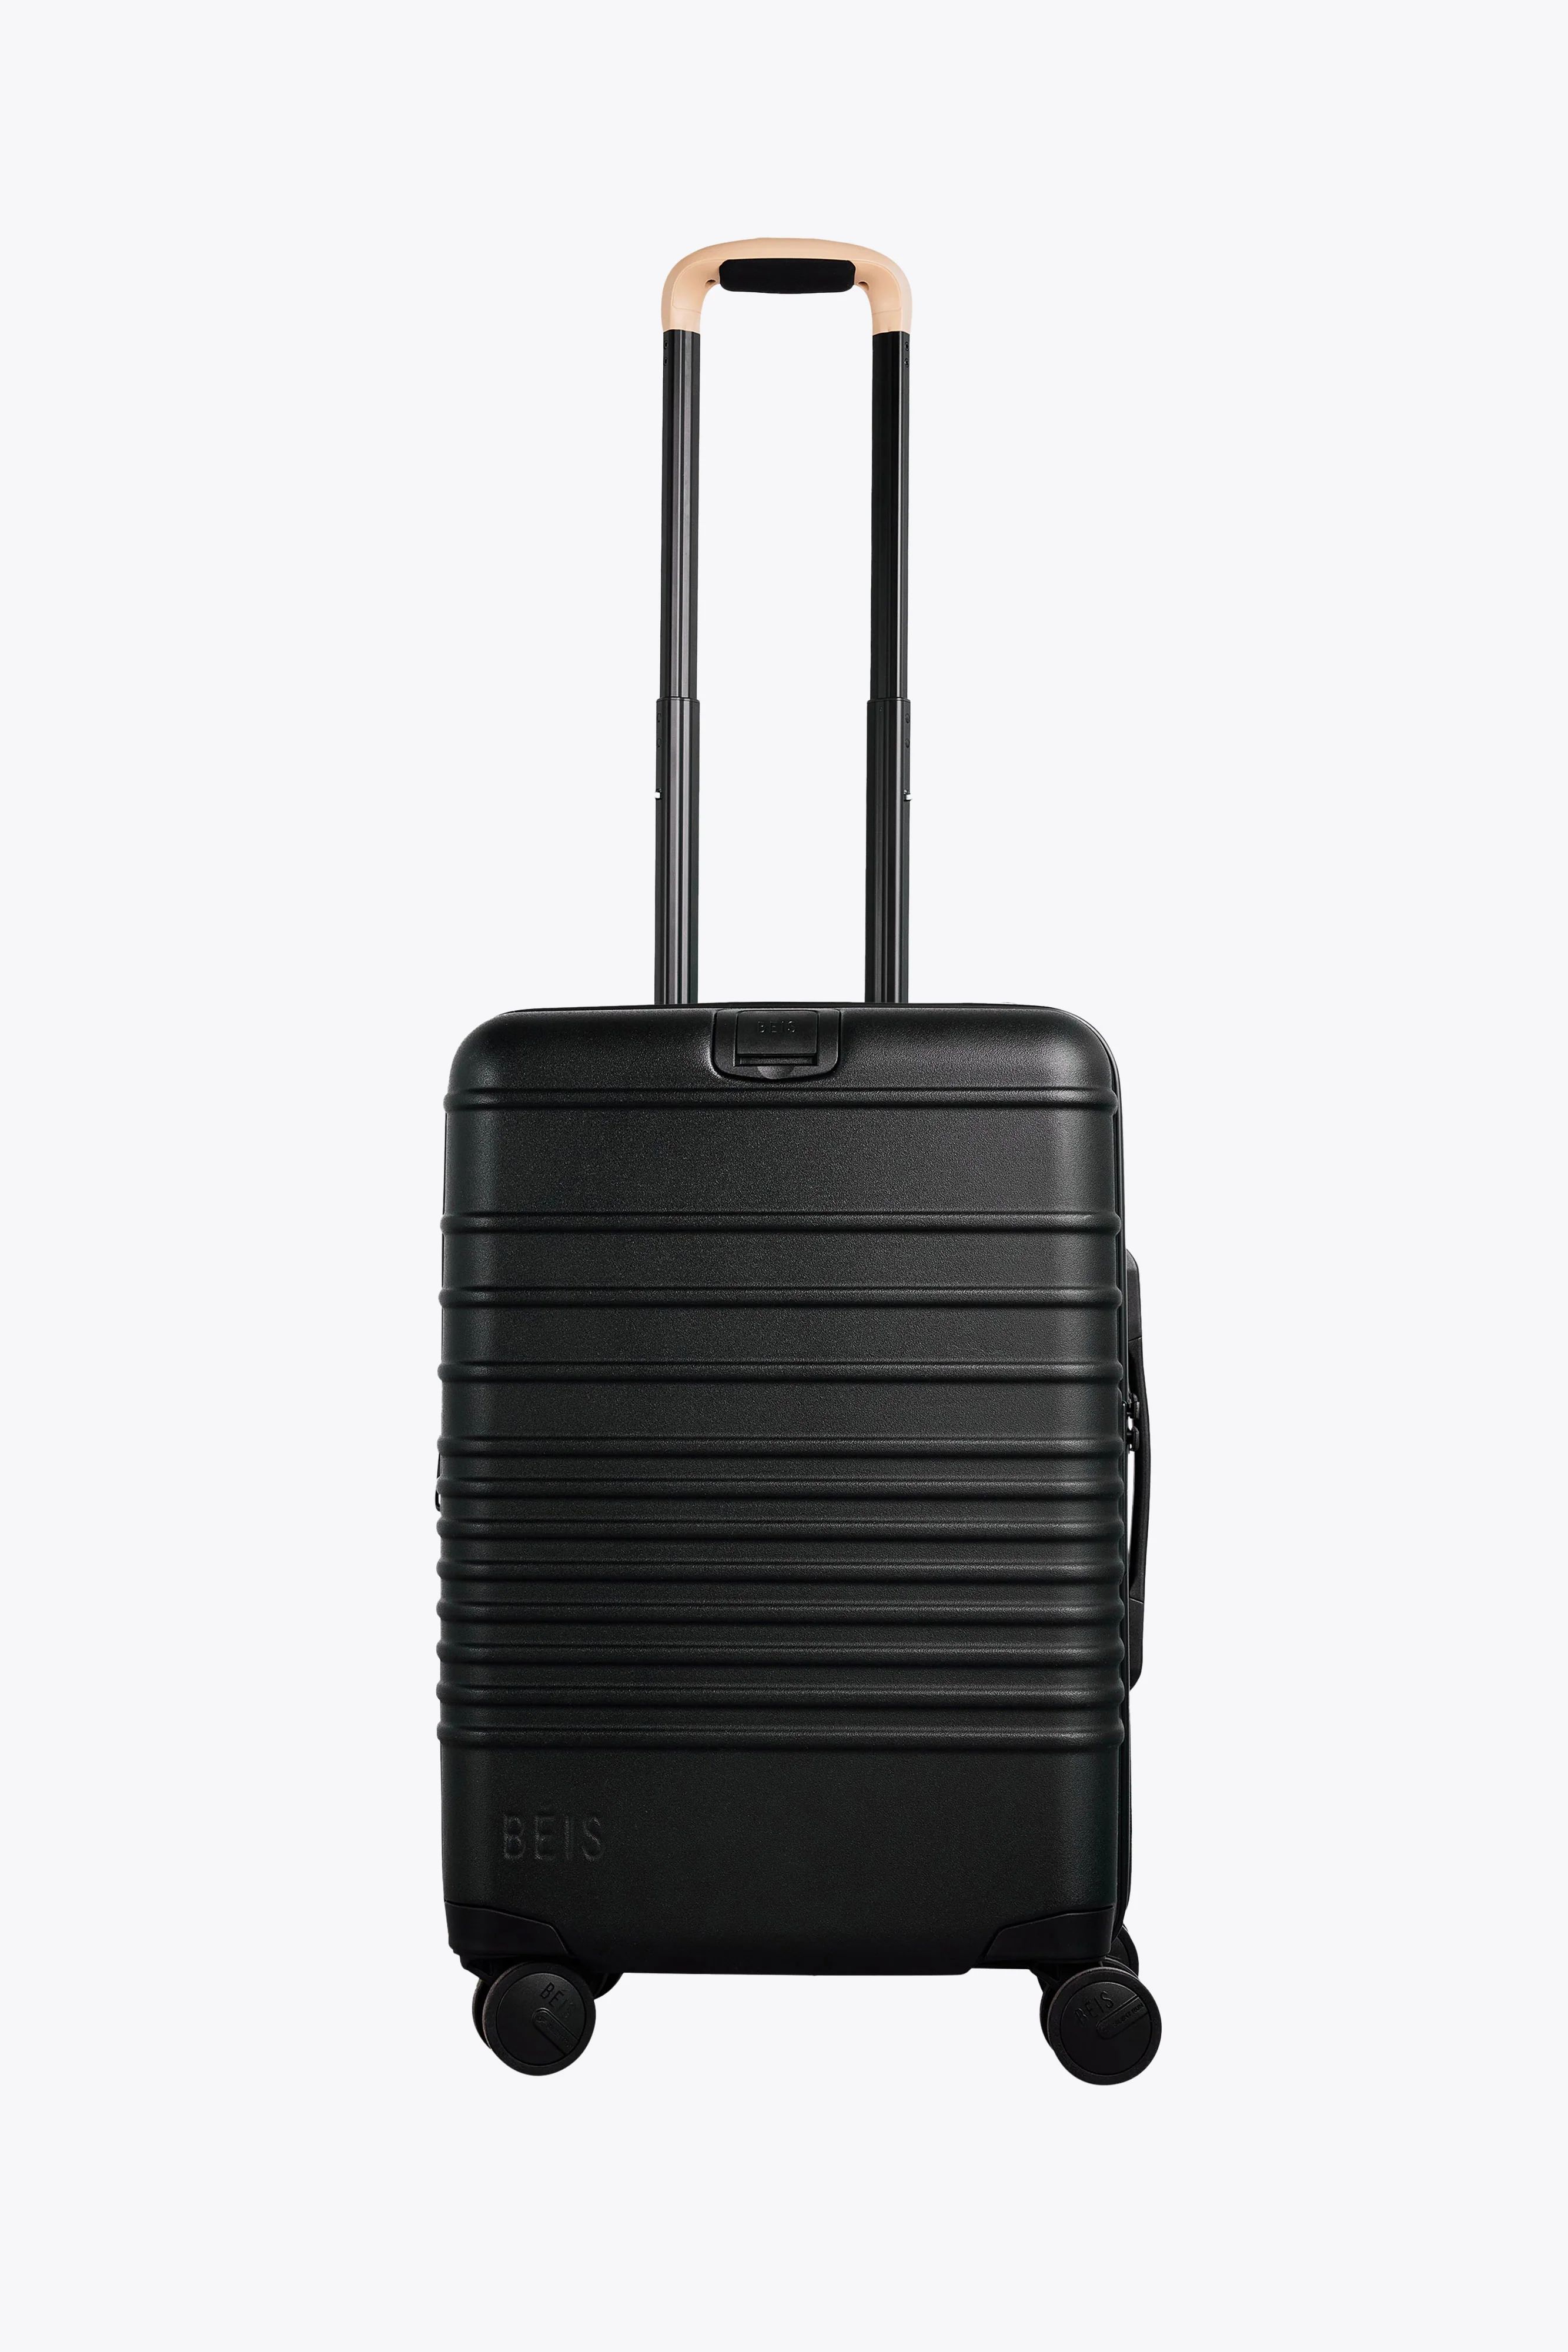 The Carry-On Roller in Black | BÉIS Travel